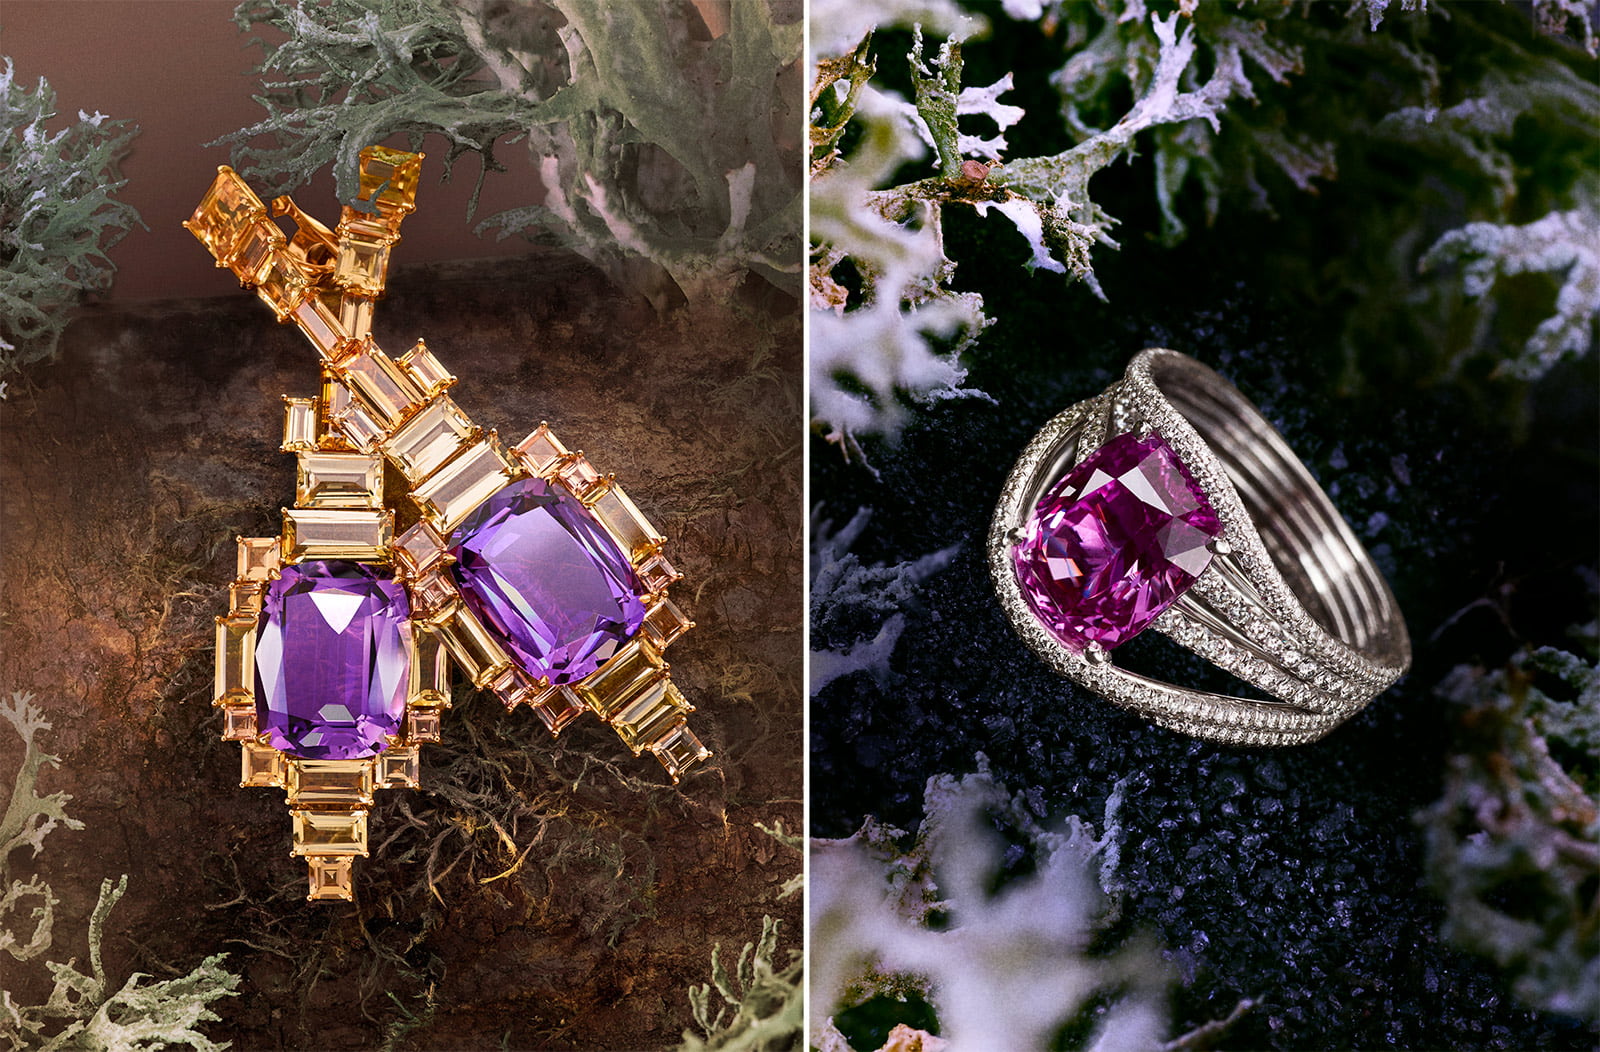 House of Geneva Horloge Fleurie Numéro 7 earrings with cushion cut amethysts and topaz (left) and the Horloge Fleurie Numéro 8 ring with a pink cushion-cut Madagascan sapphire of 5.16 carats 